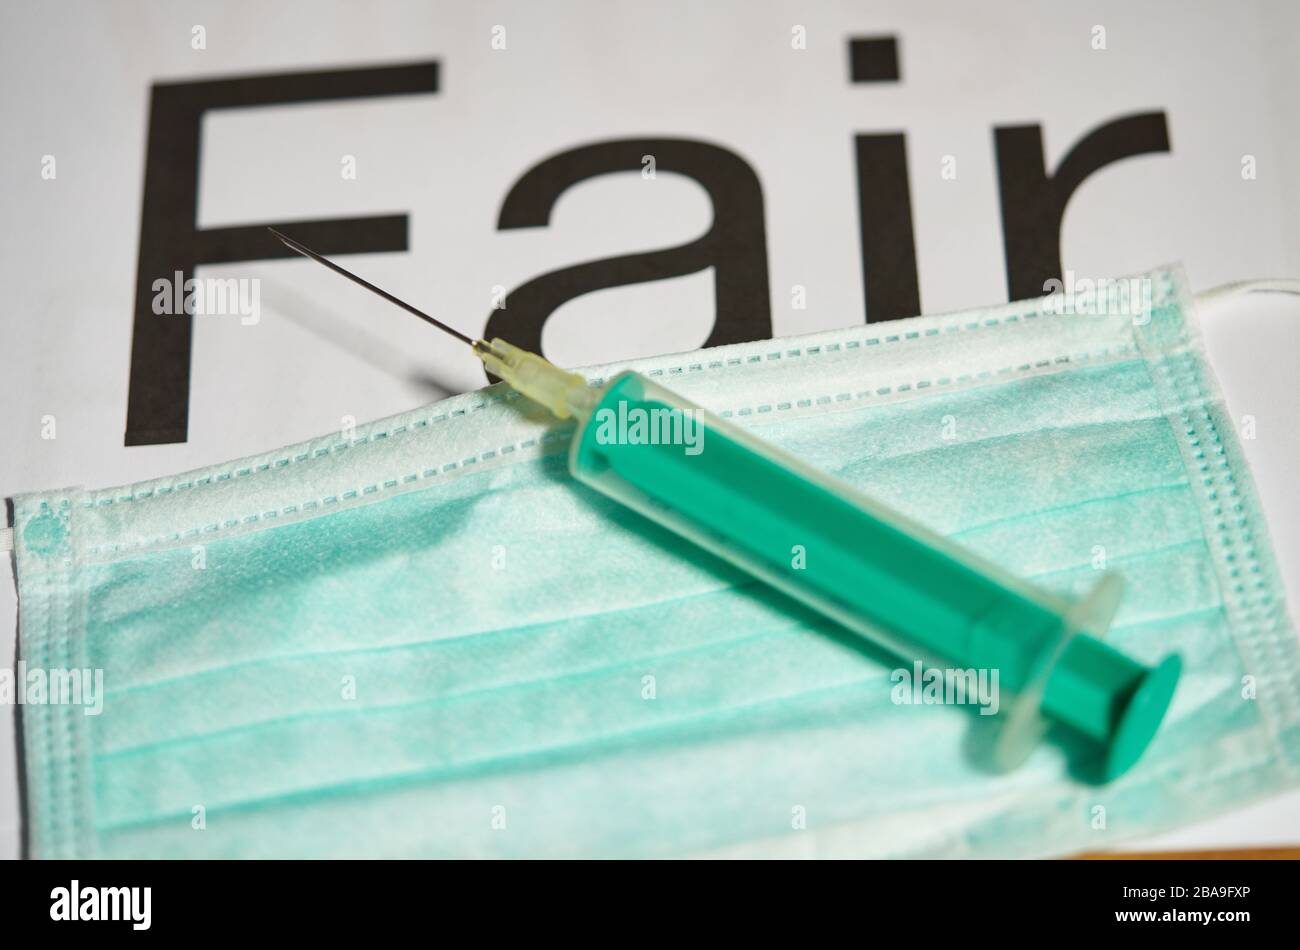 Covid-19 symbol in  Marktoberdorf, Germany, March 26, 2020. Injection needle for vaccination and a mouth protection. Due to the Corona virus disease (COVID-19) a Fairness, collegiality, hug, congratulations, fair, payment for workers in the health system in necessary. on March 26, 2020 in Marktoberdorf, Germany  © Peter Schatz / Alamy Live News Stock Photo